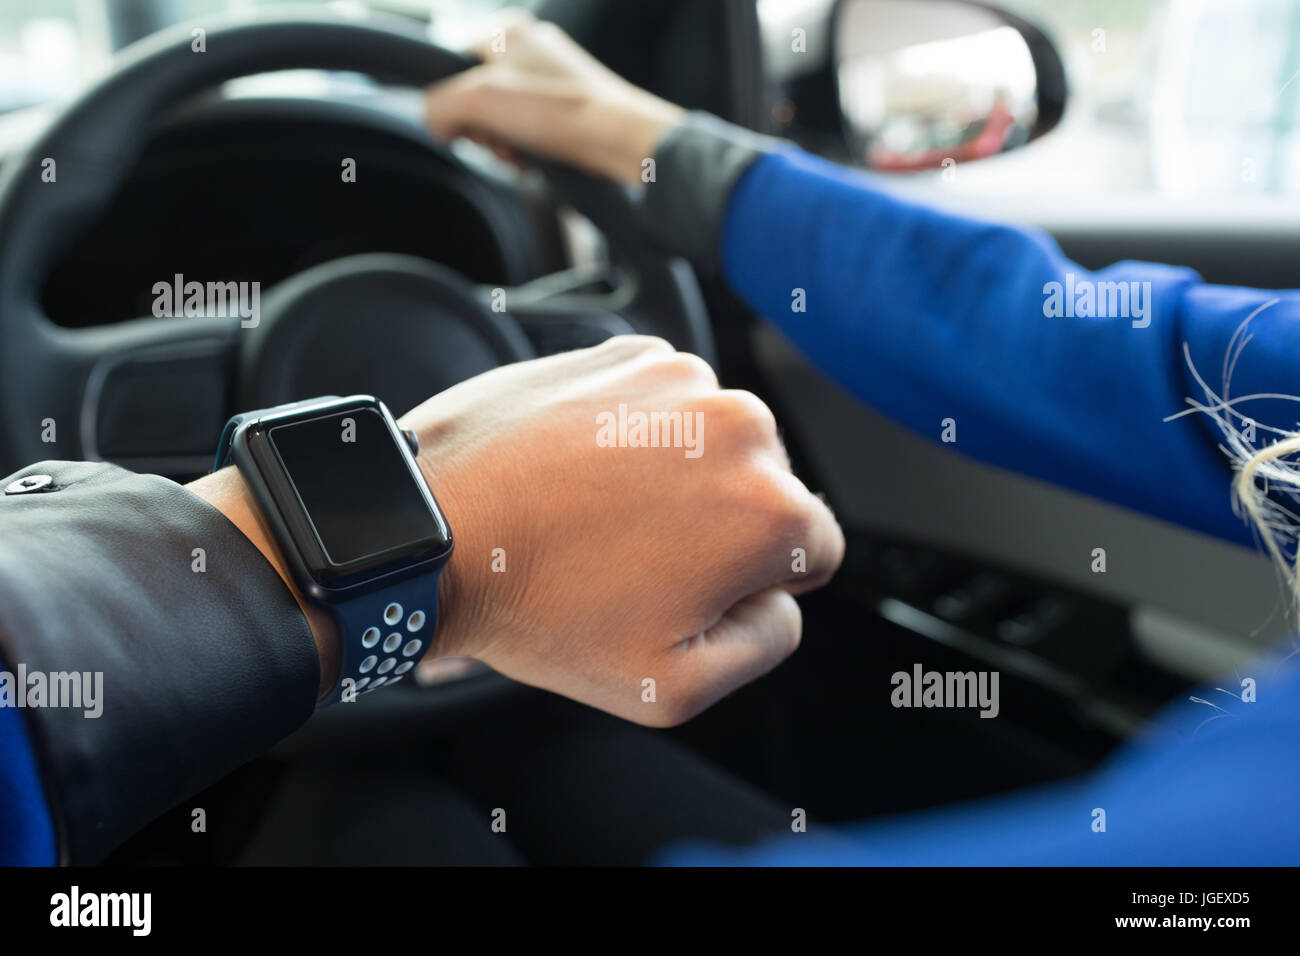 Cropped image of woman wearing wristwatch in car Stock Photo